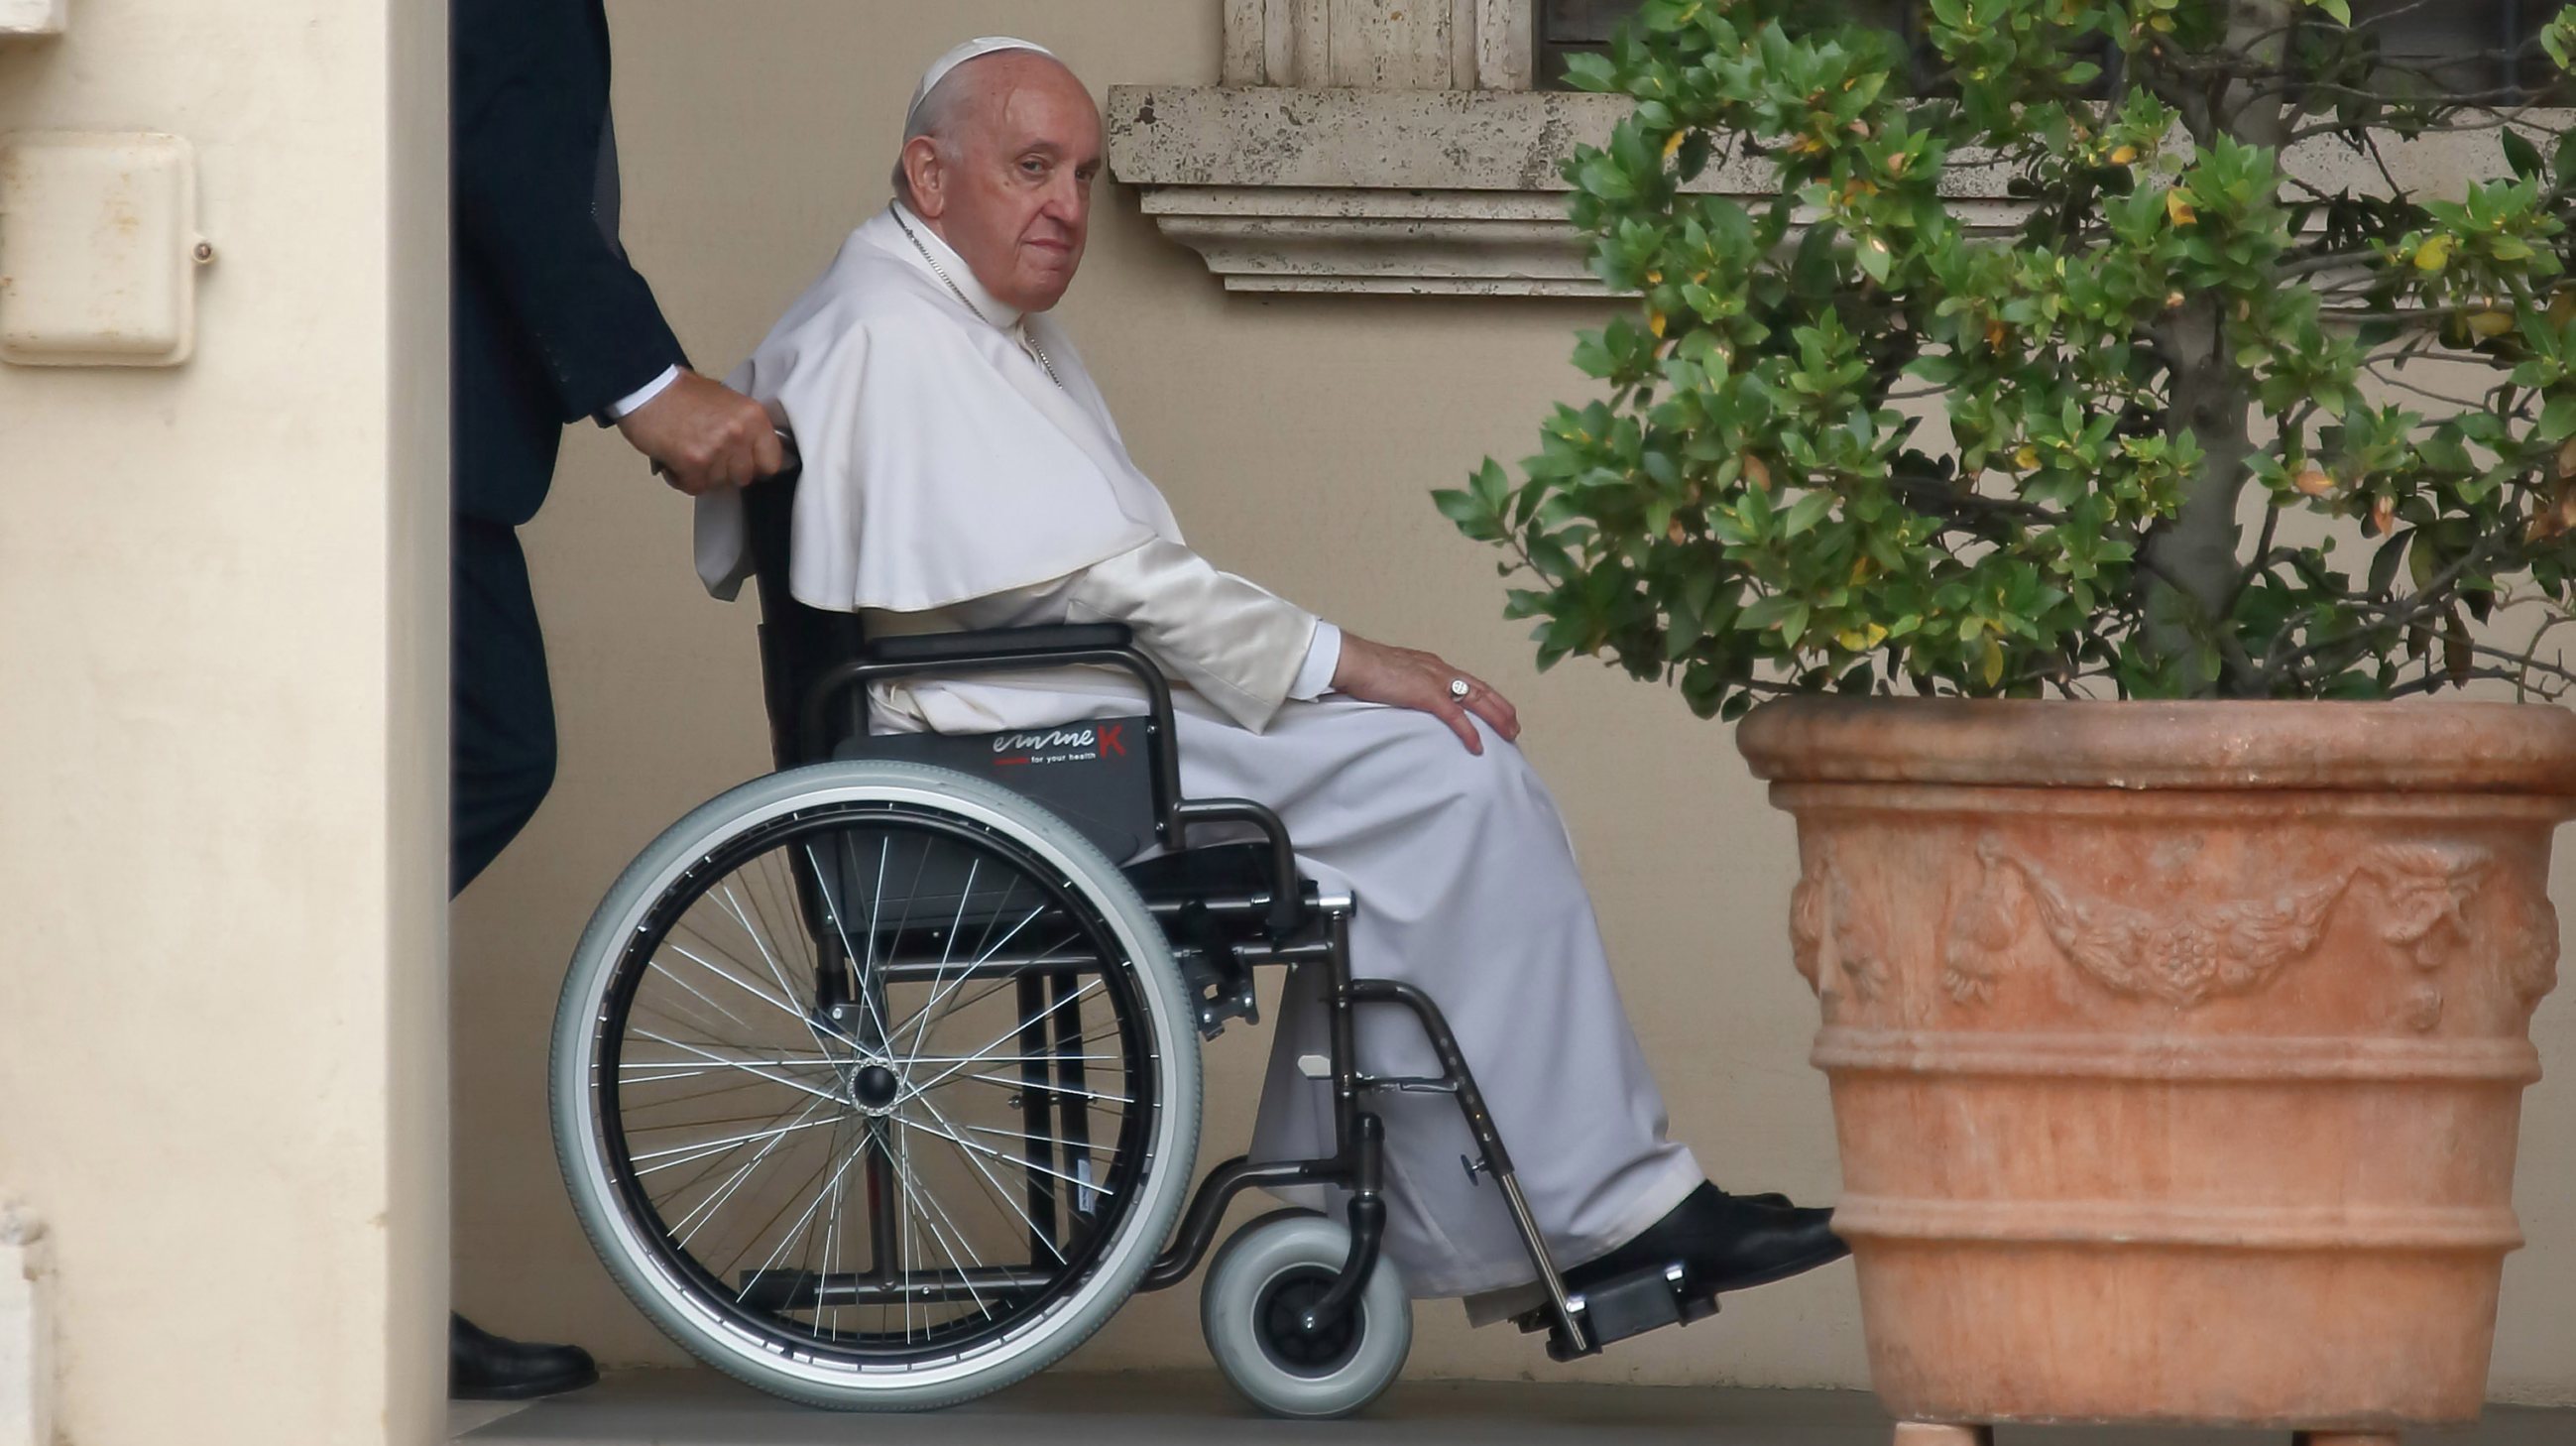 Children Courtyard: At The Meeting With Pope Francis Children With Disabilities And Ukrainian Refugees